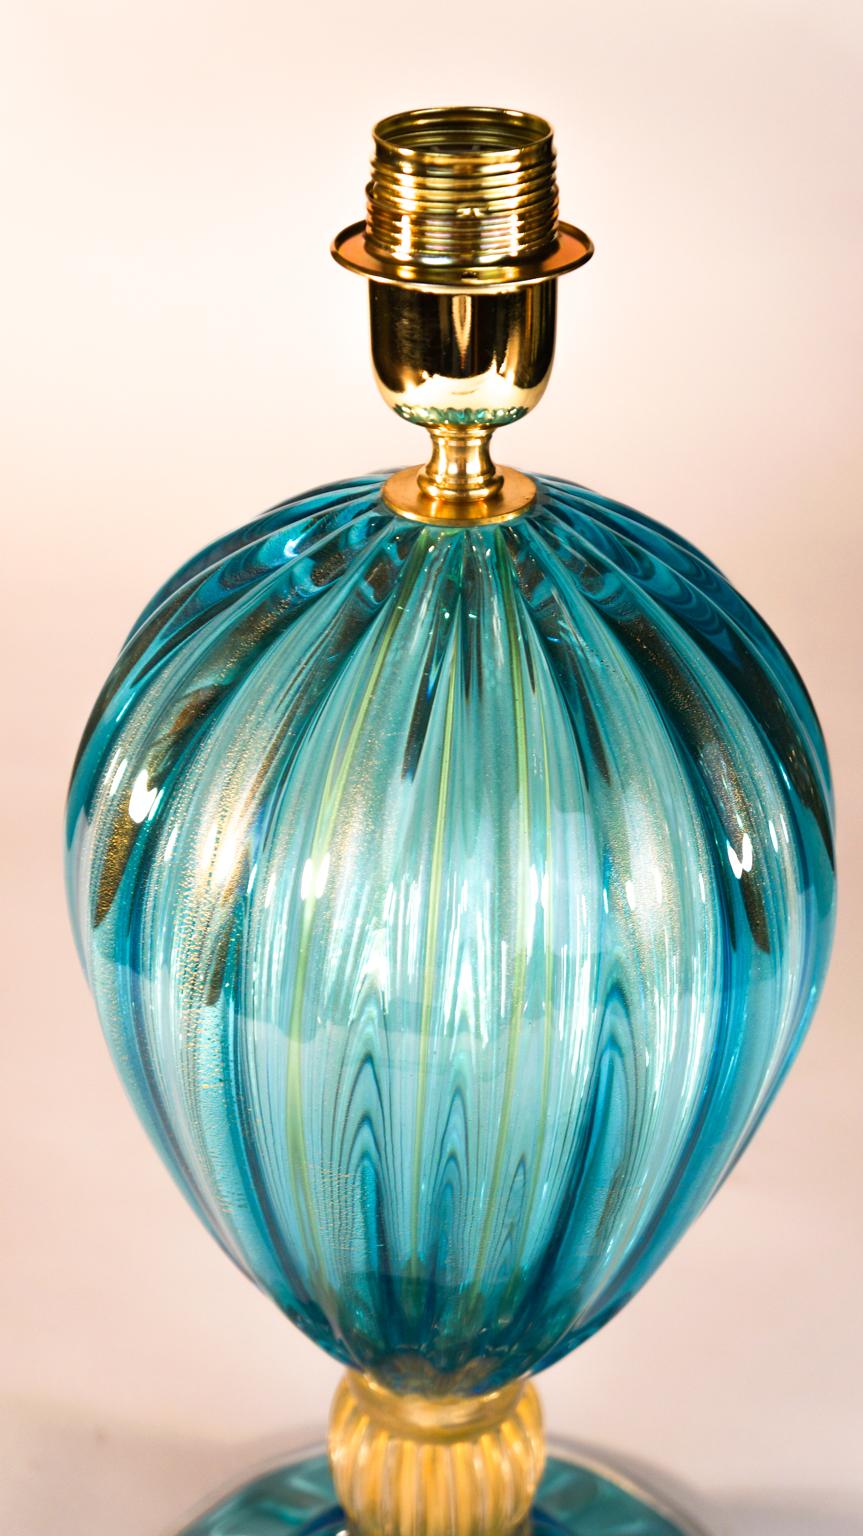 Alberto Donà Pair of Light Blue Italian Murano Glass Table Lamps Veronese, 1980s For Sale 2